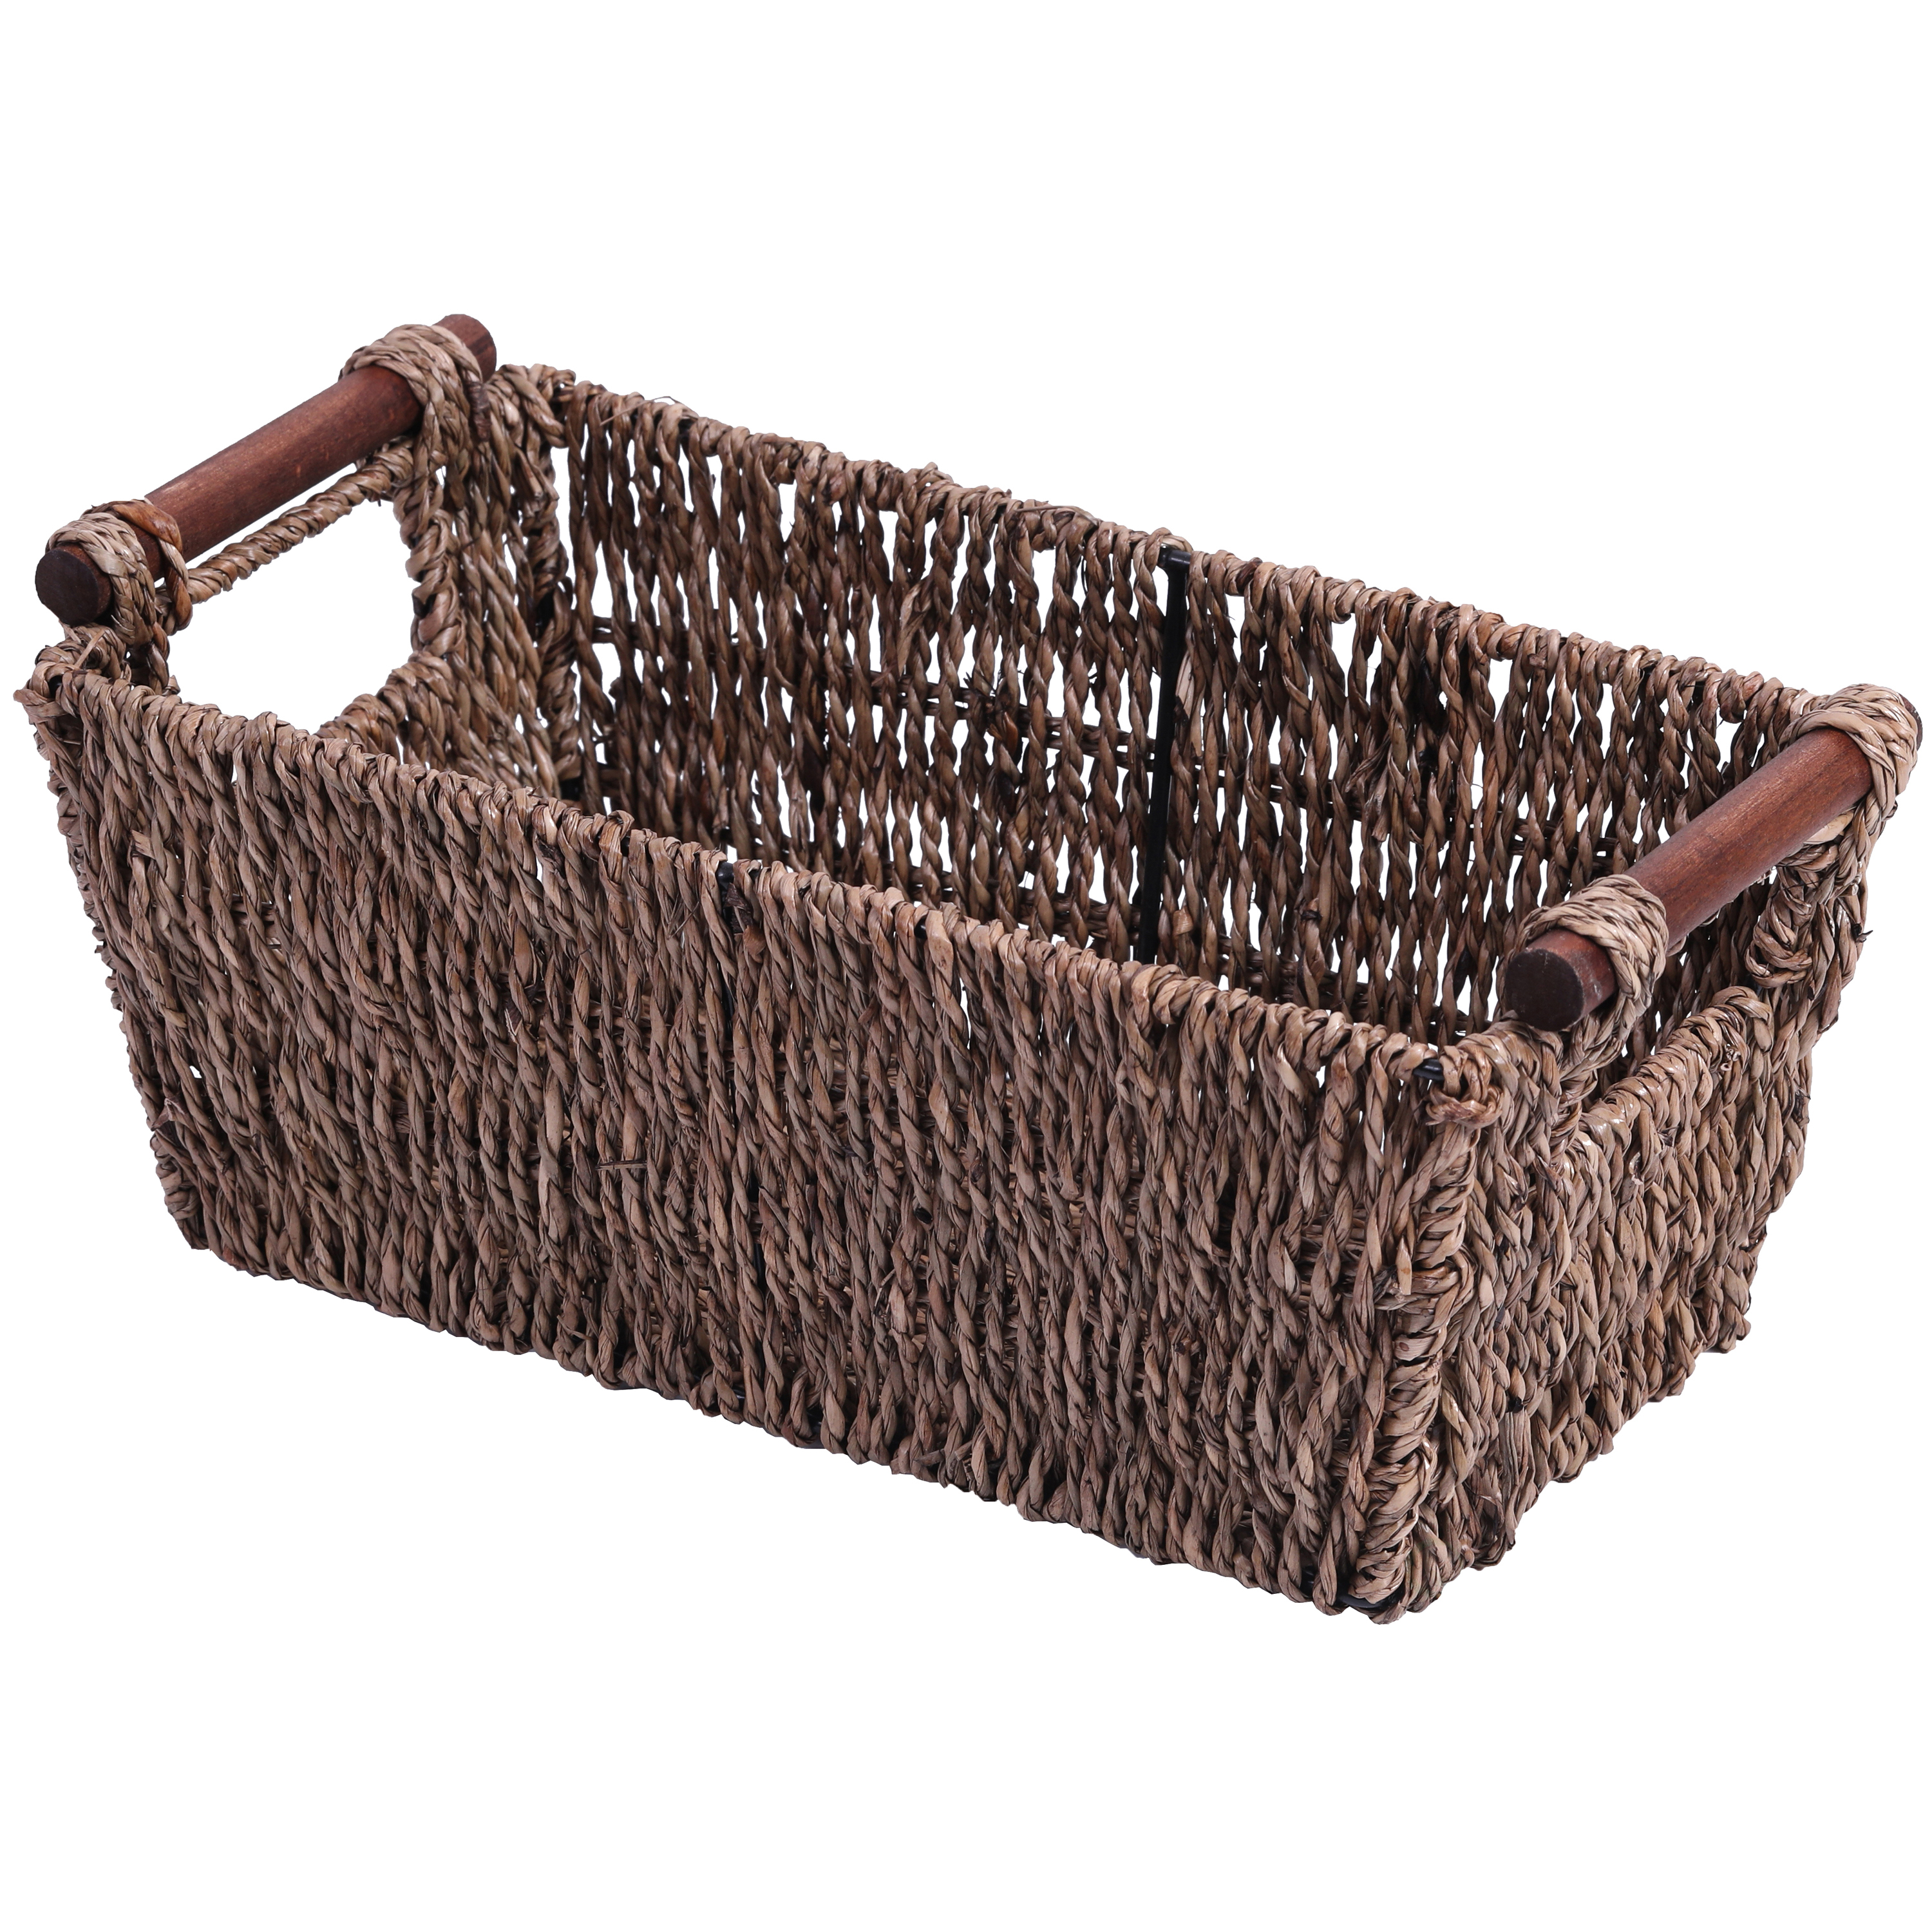 Wickerwise vintiquewise qi003419 seagrass counter-top basket for folded paper towel